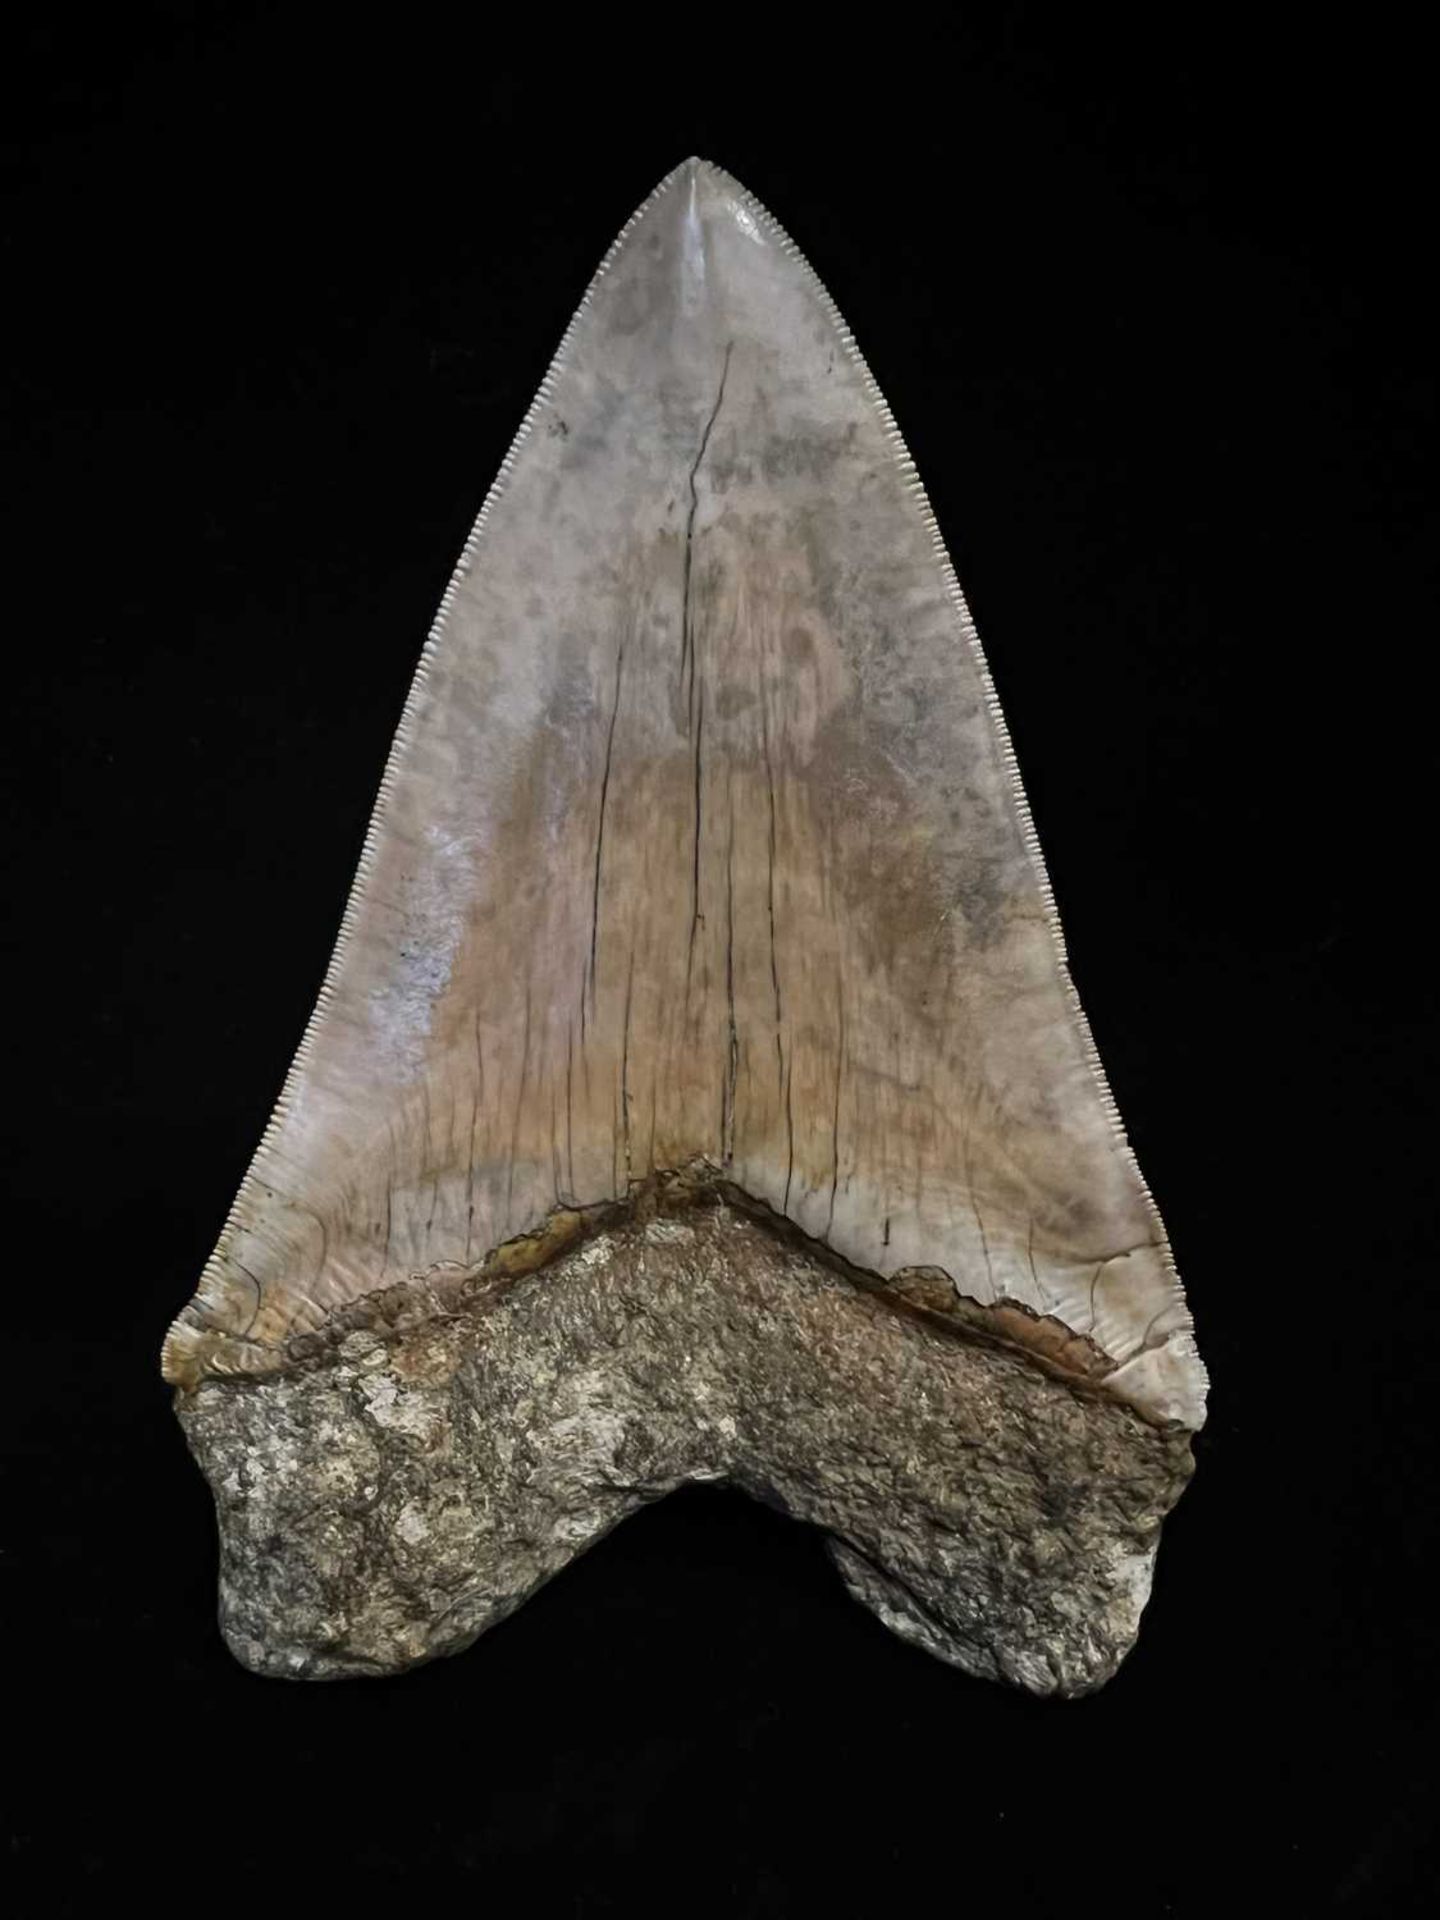 A LARGE FOSSILISED, EXTINCT MEGALODON SHARK TOOTH - Image 2 of 6